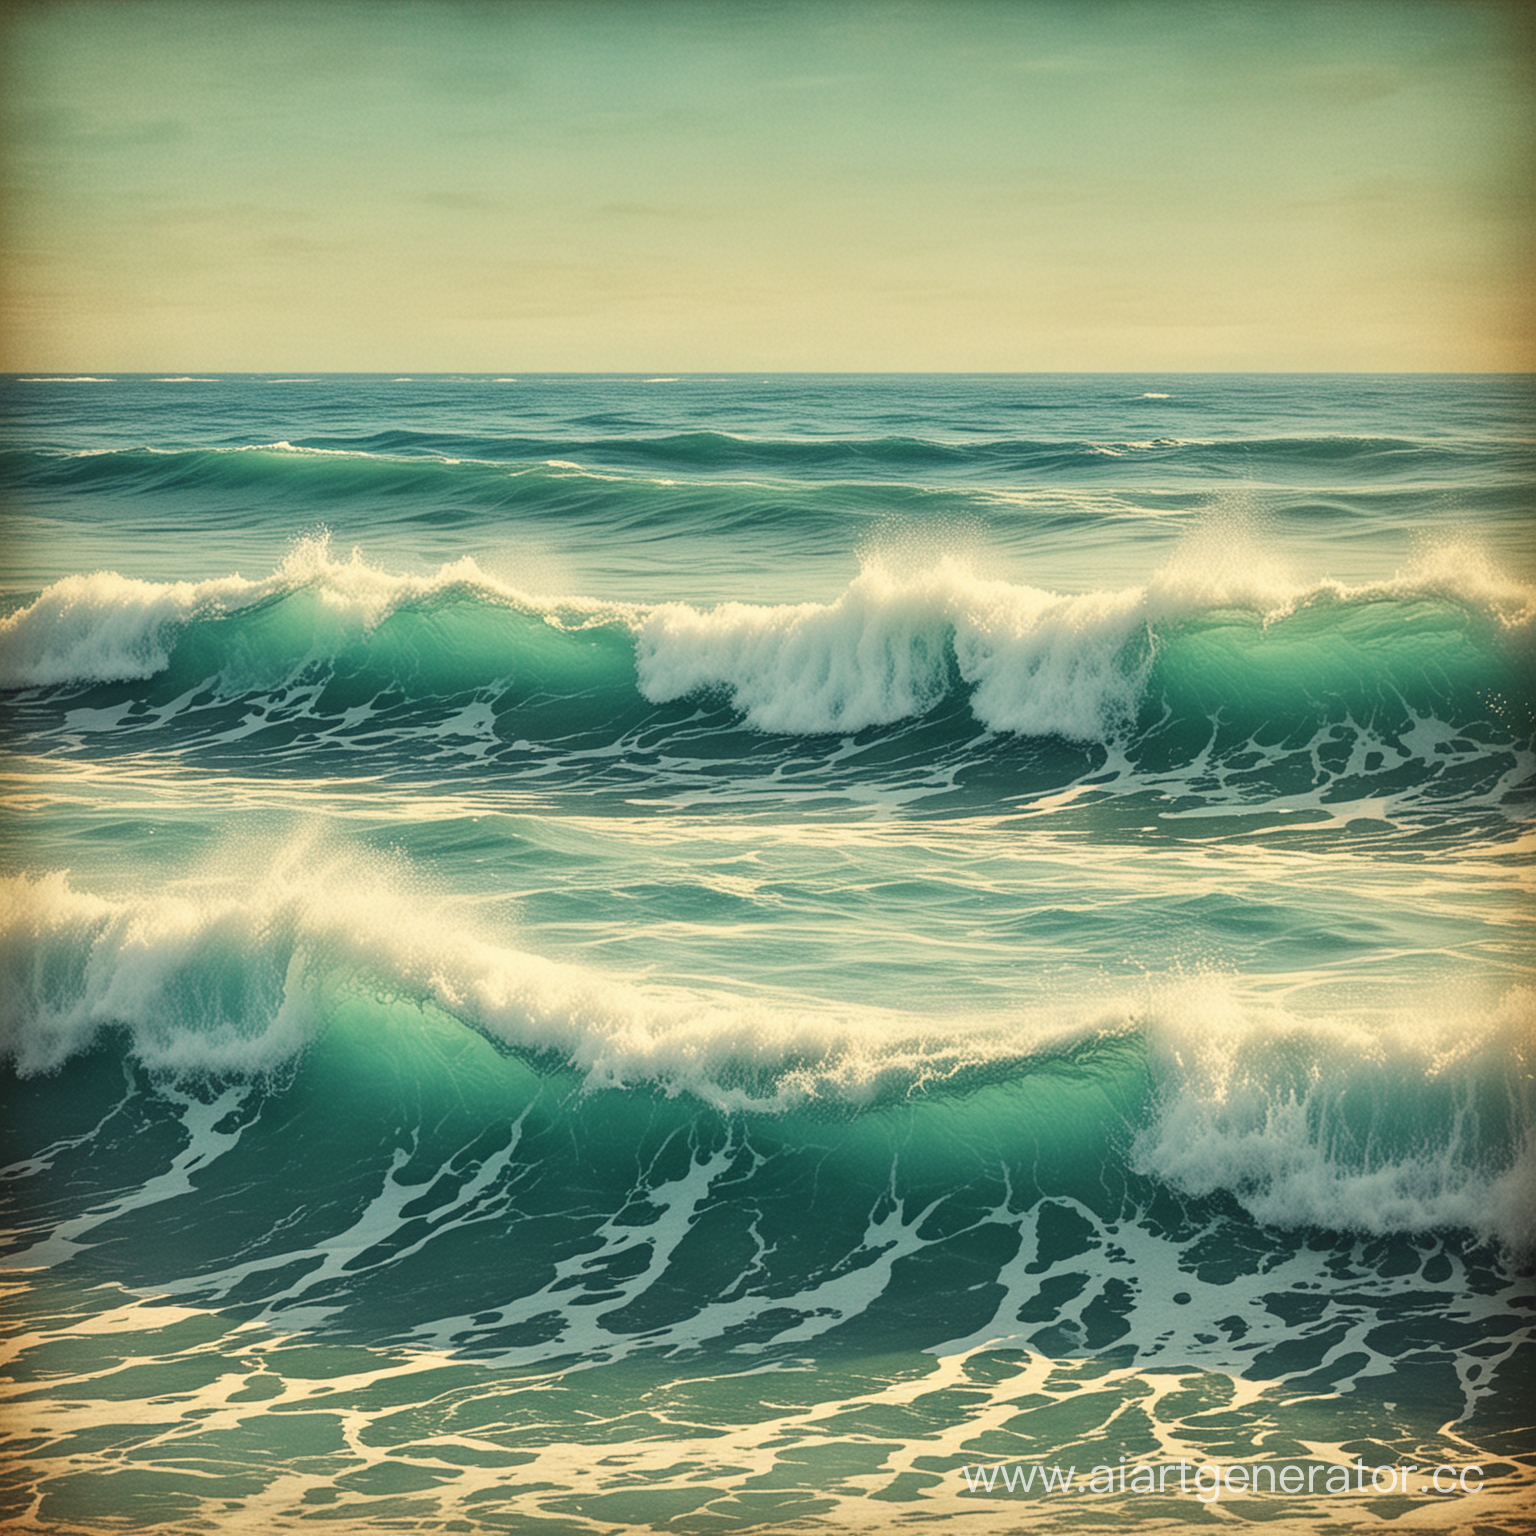 cover for music album with blue waves of the sea in vintage style